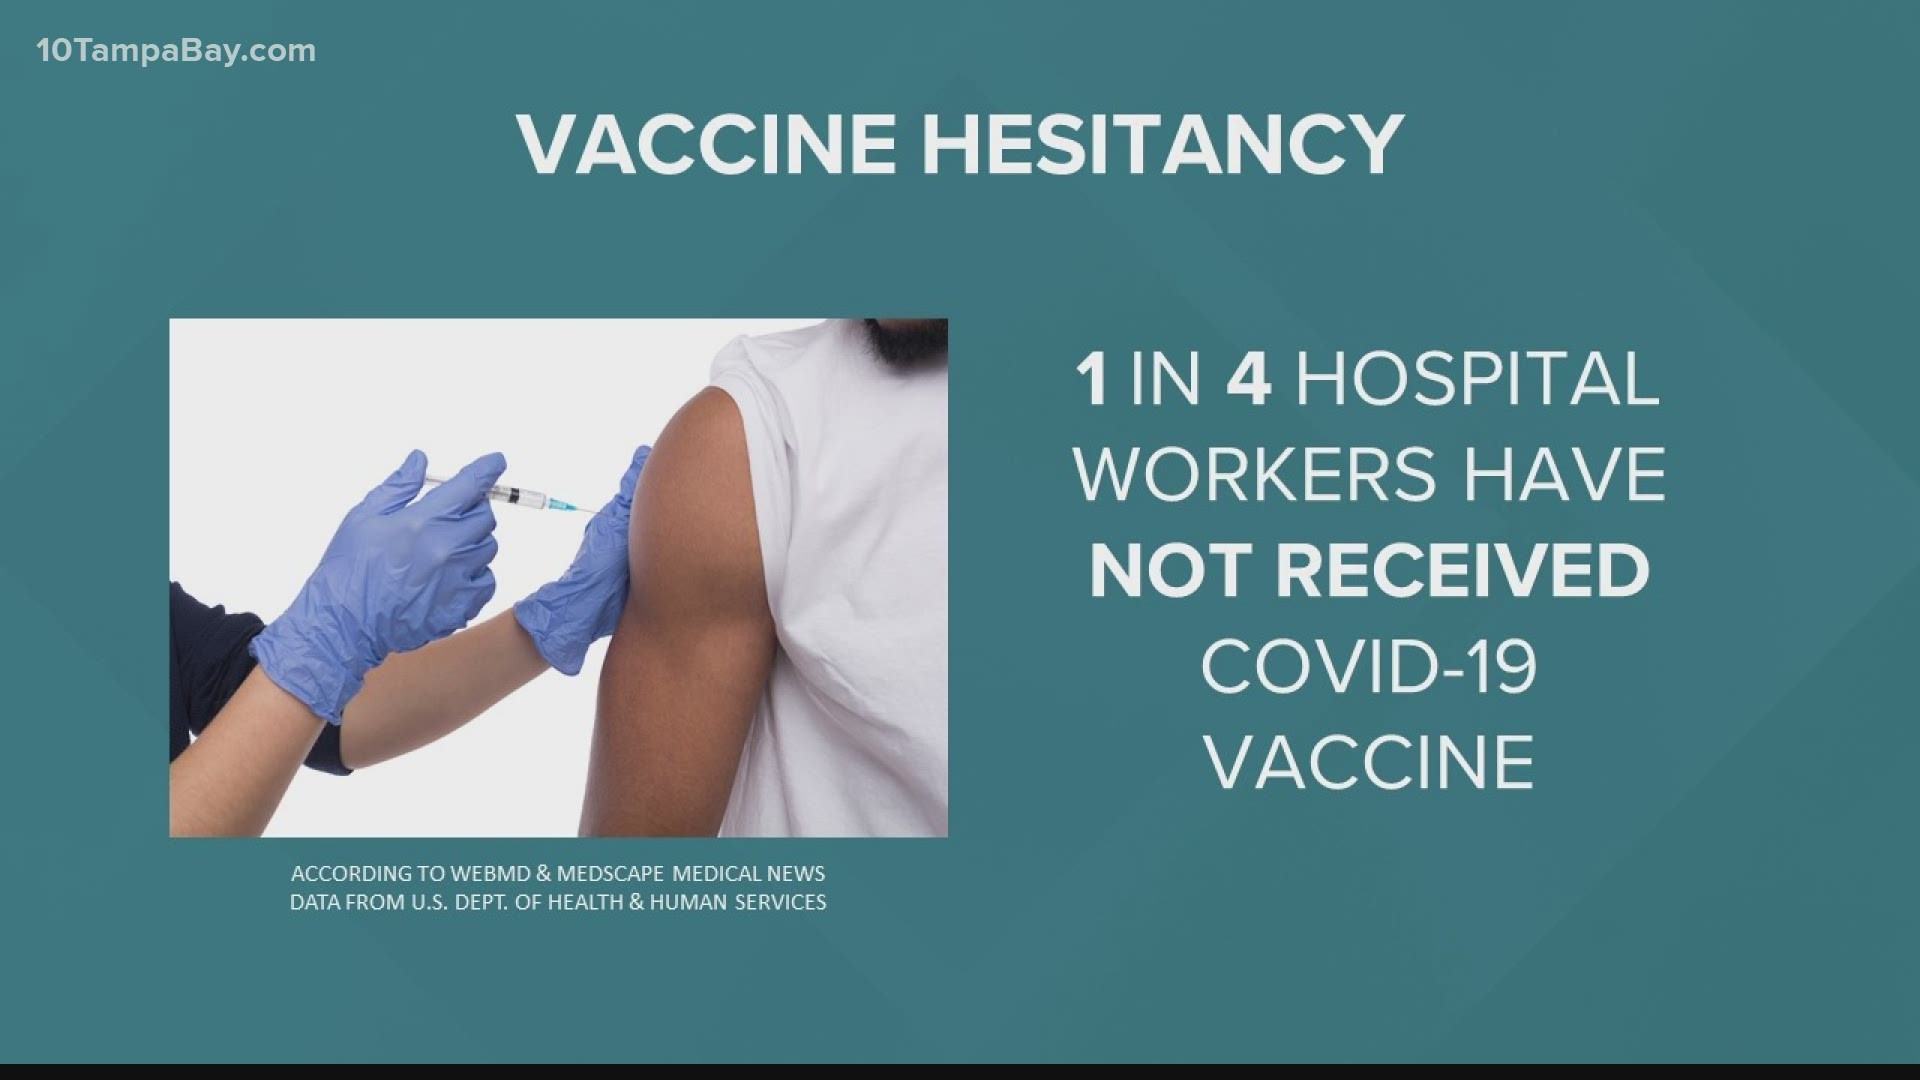 New research shows 1 in 4 hospital workers nationwide are not vaccinated against COVID-19.